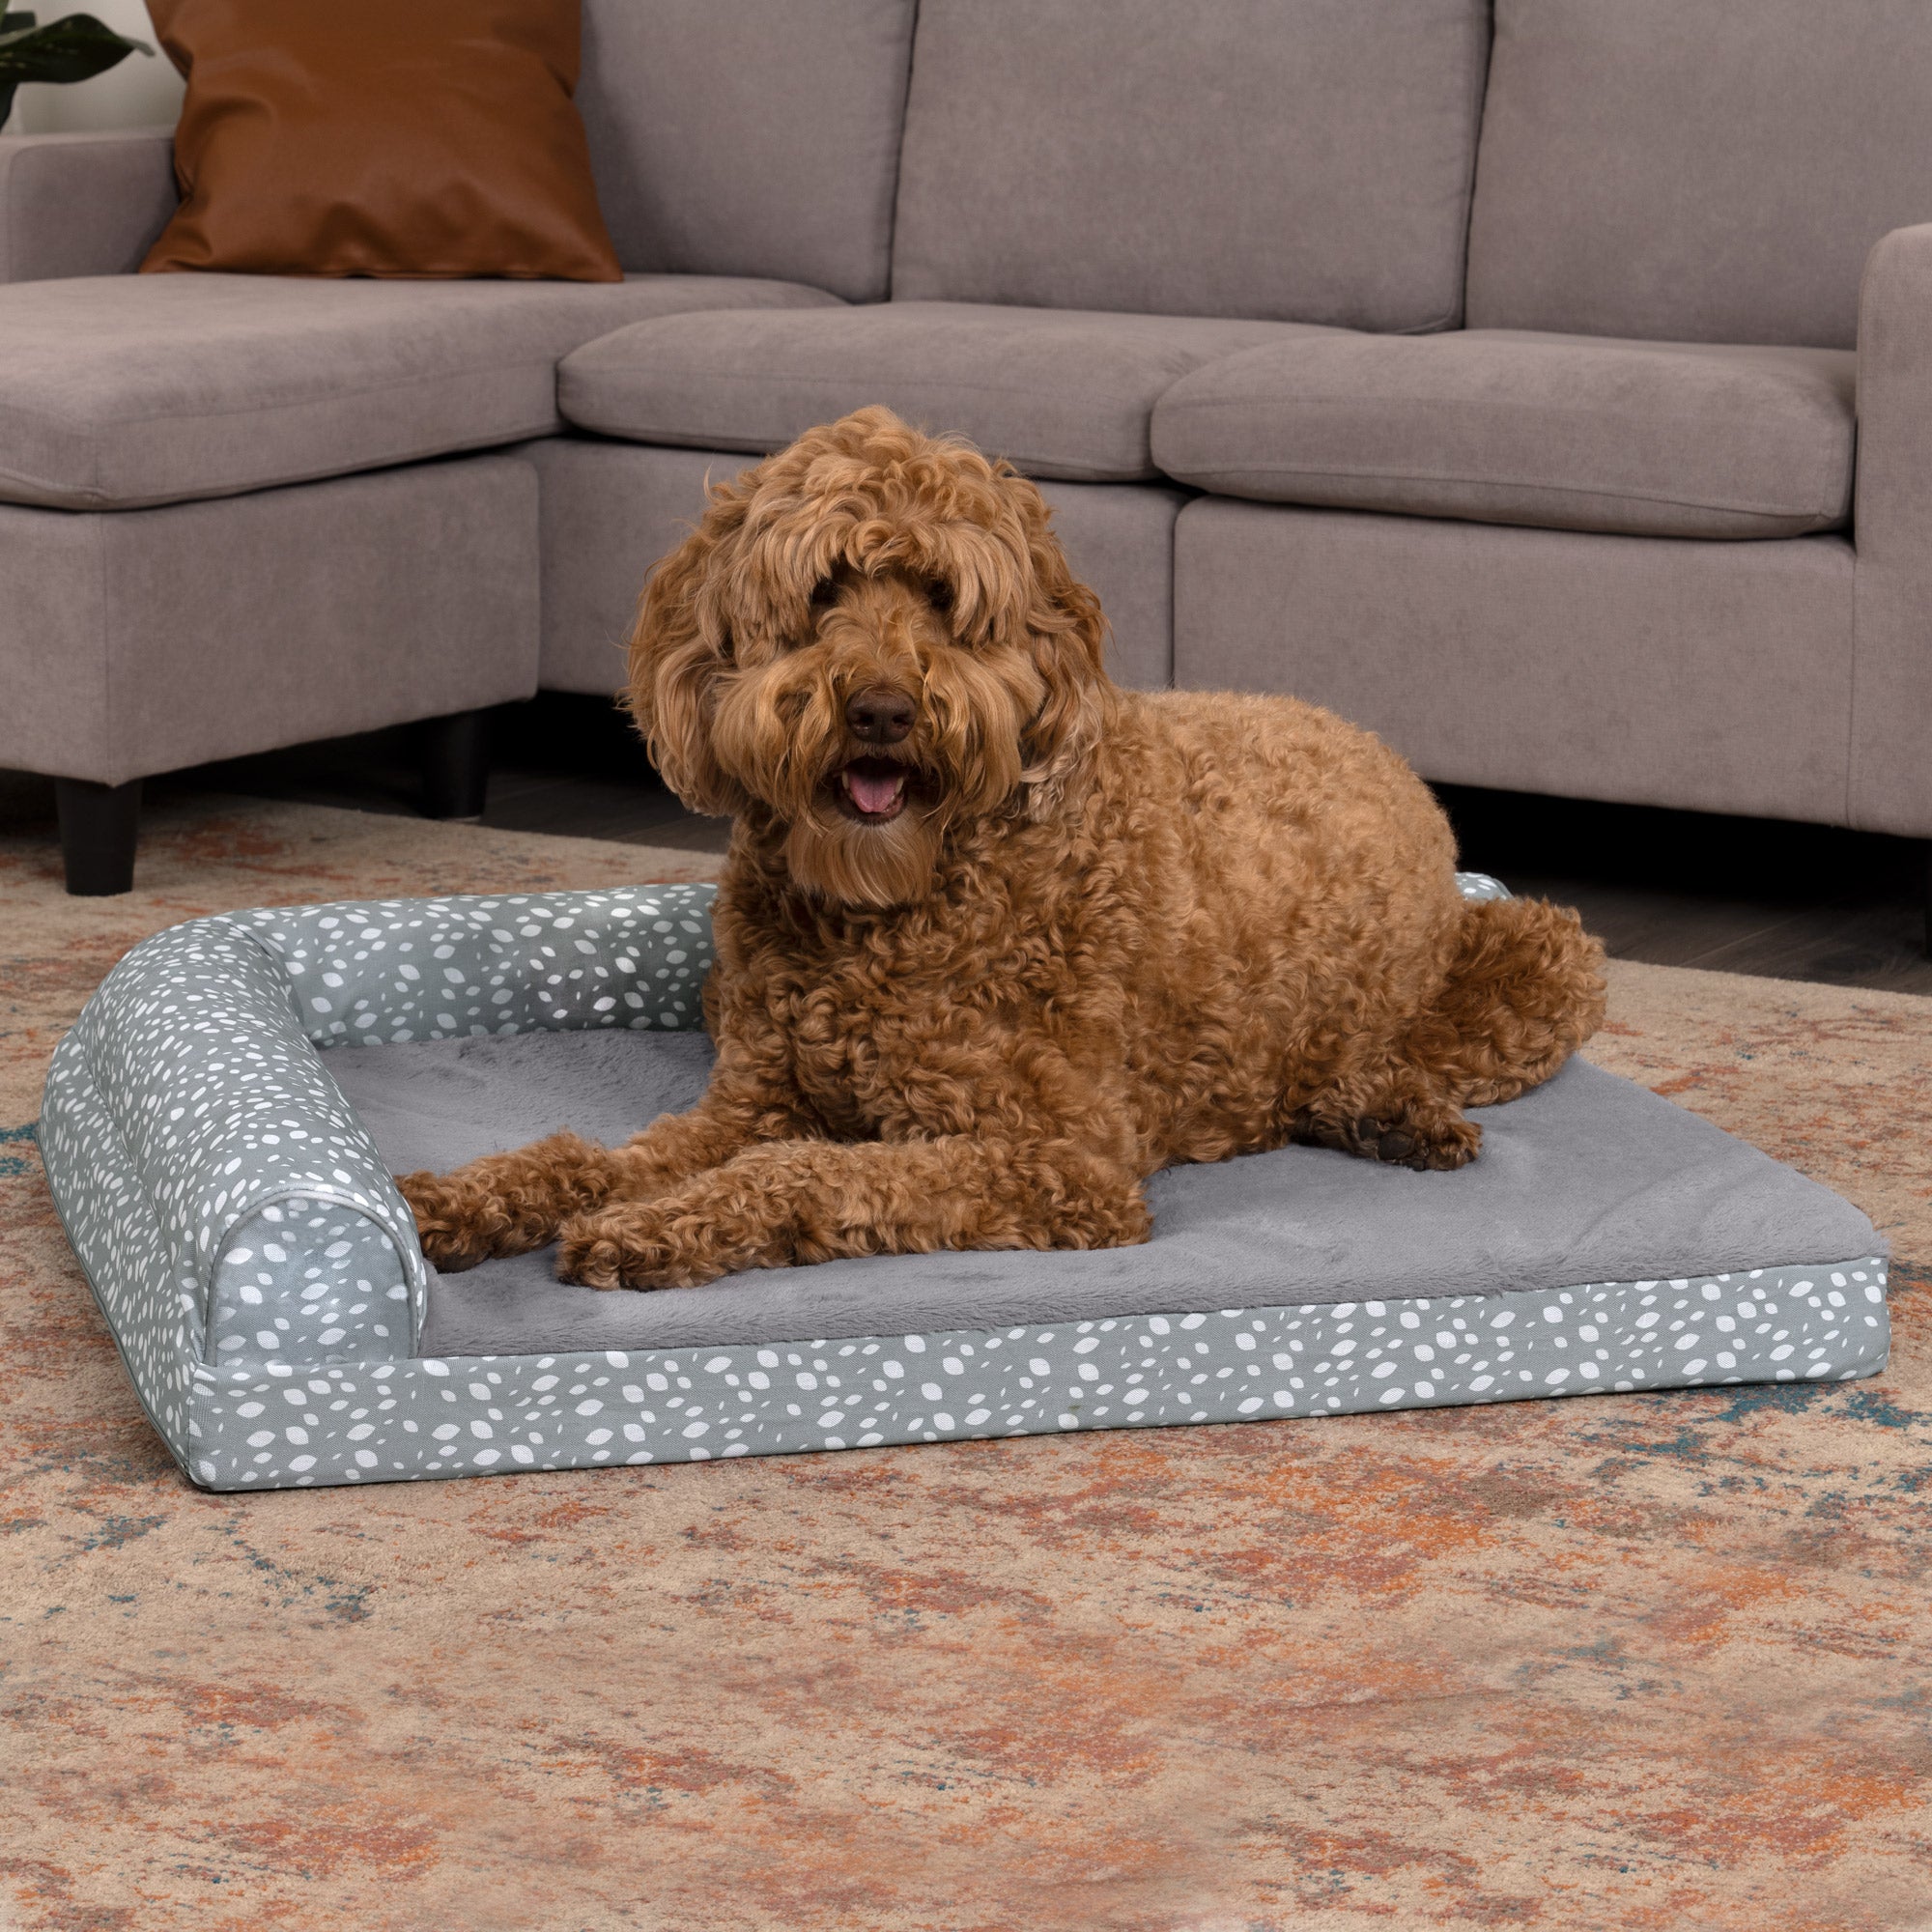 FurHaven Plush Crate Ortho Extra Small Pet Mat - Gray